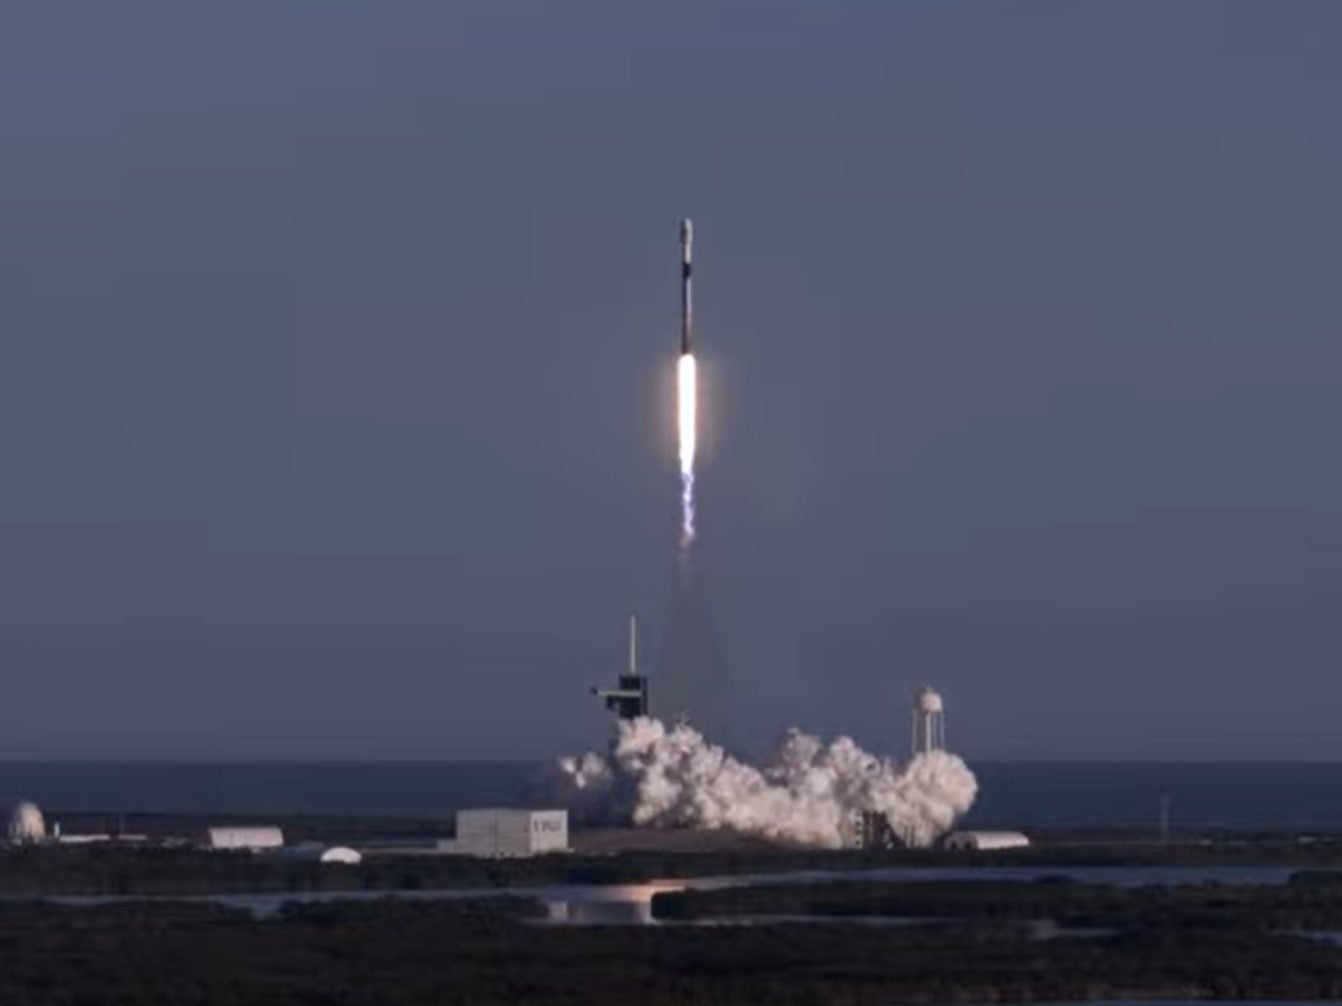 The SpaceX Falcon 9 rocket carrying 60 Starlink internet satellites lifts off in Cape Canaveral, Florida, on Wednesday 20 January, 2021